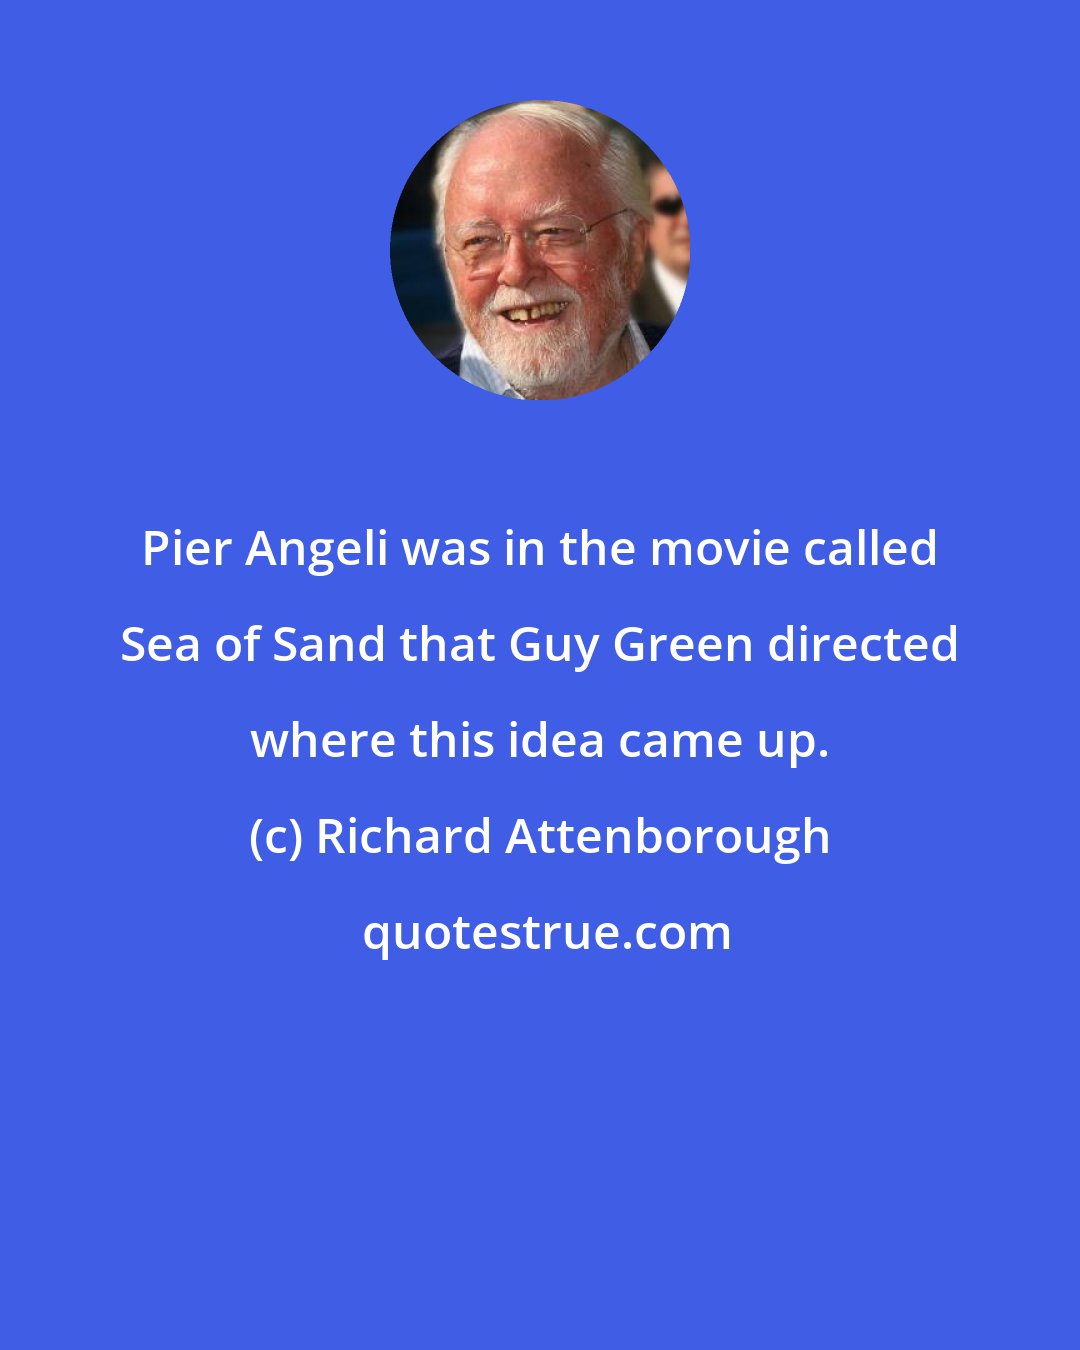 Richard Attenborough: Pier Angeli was in the movie called Sea of Sand that Guy Green directed where this idea came up.